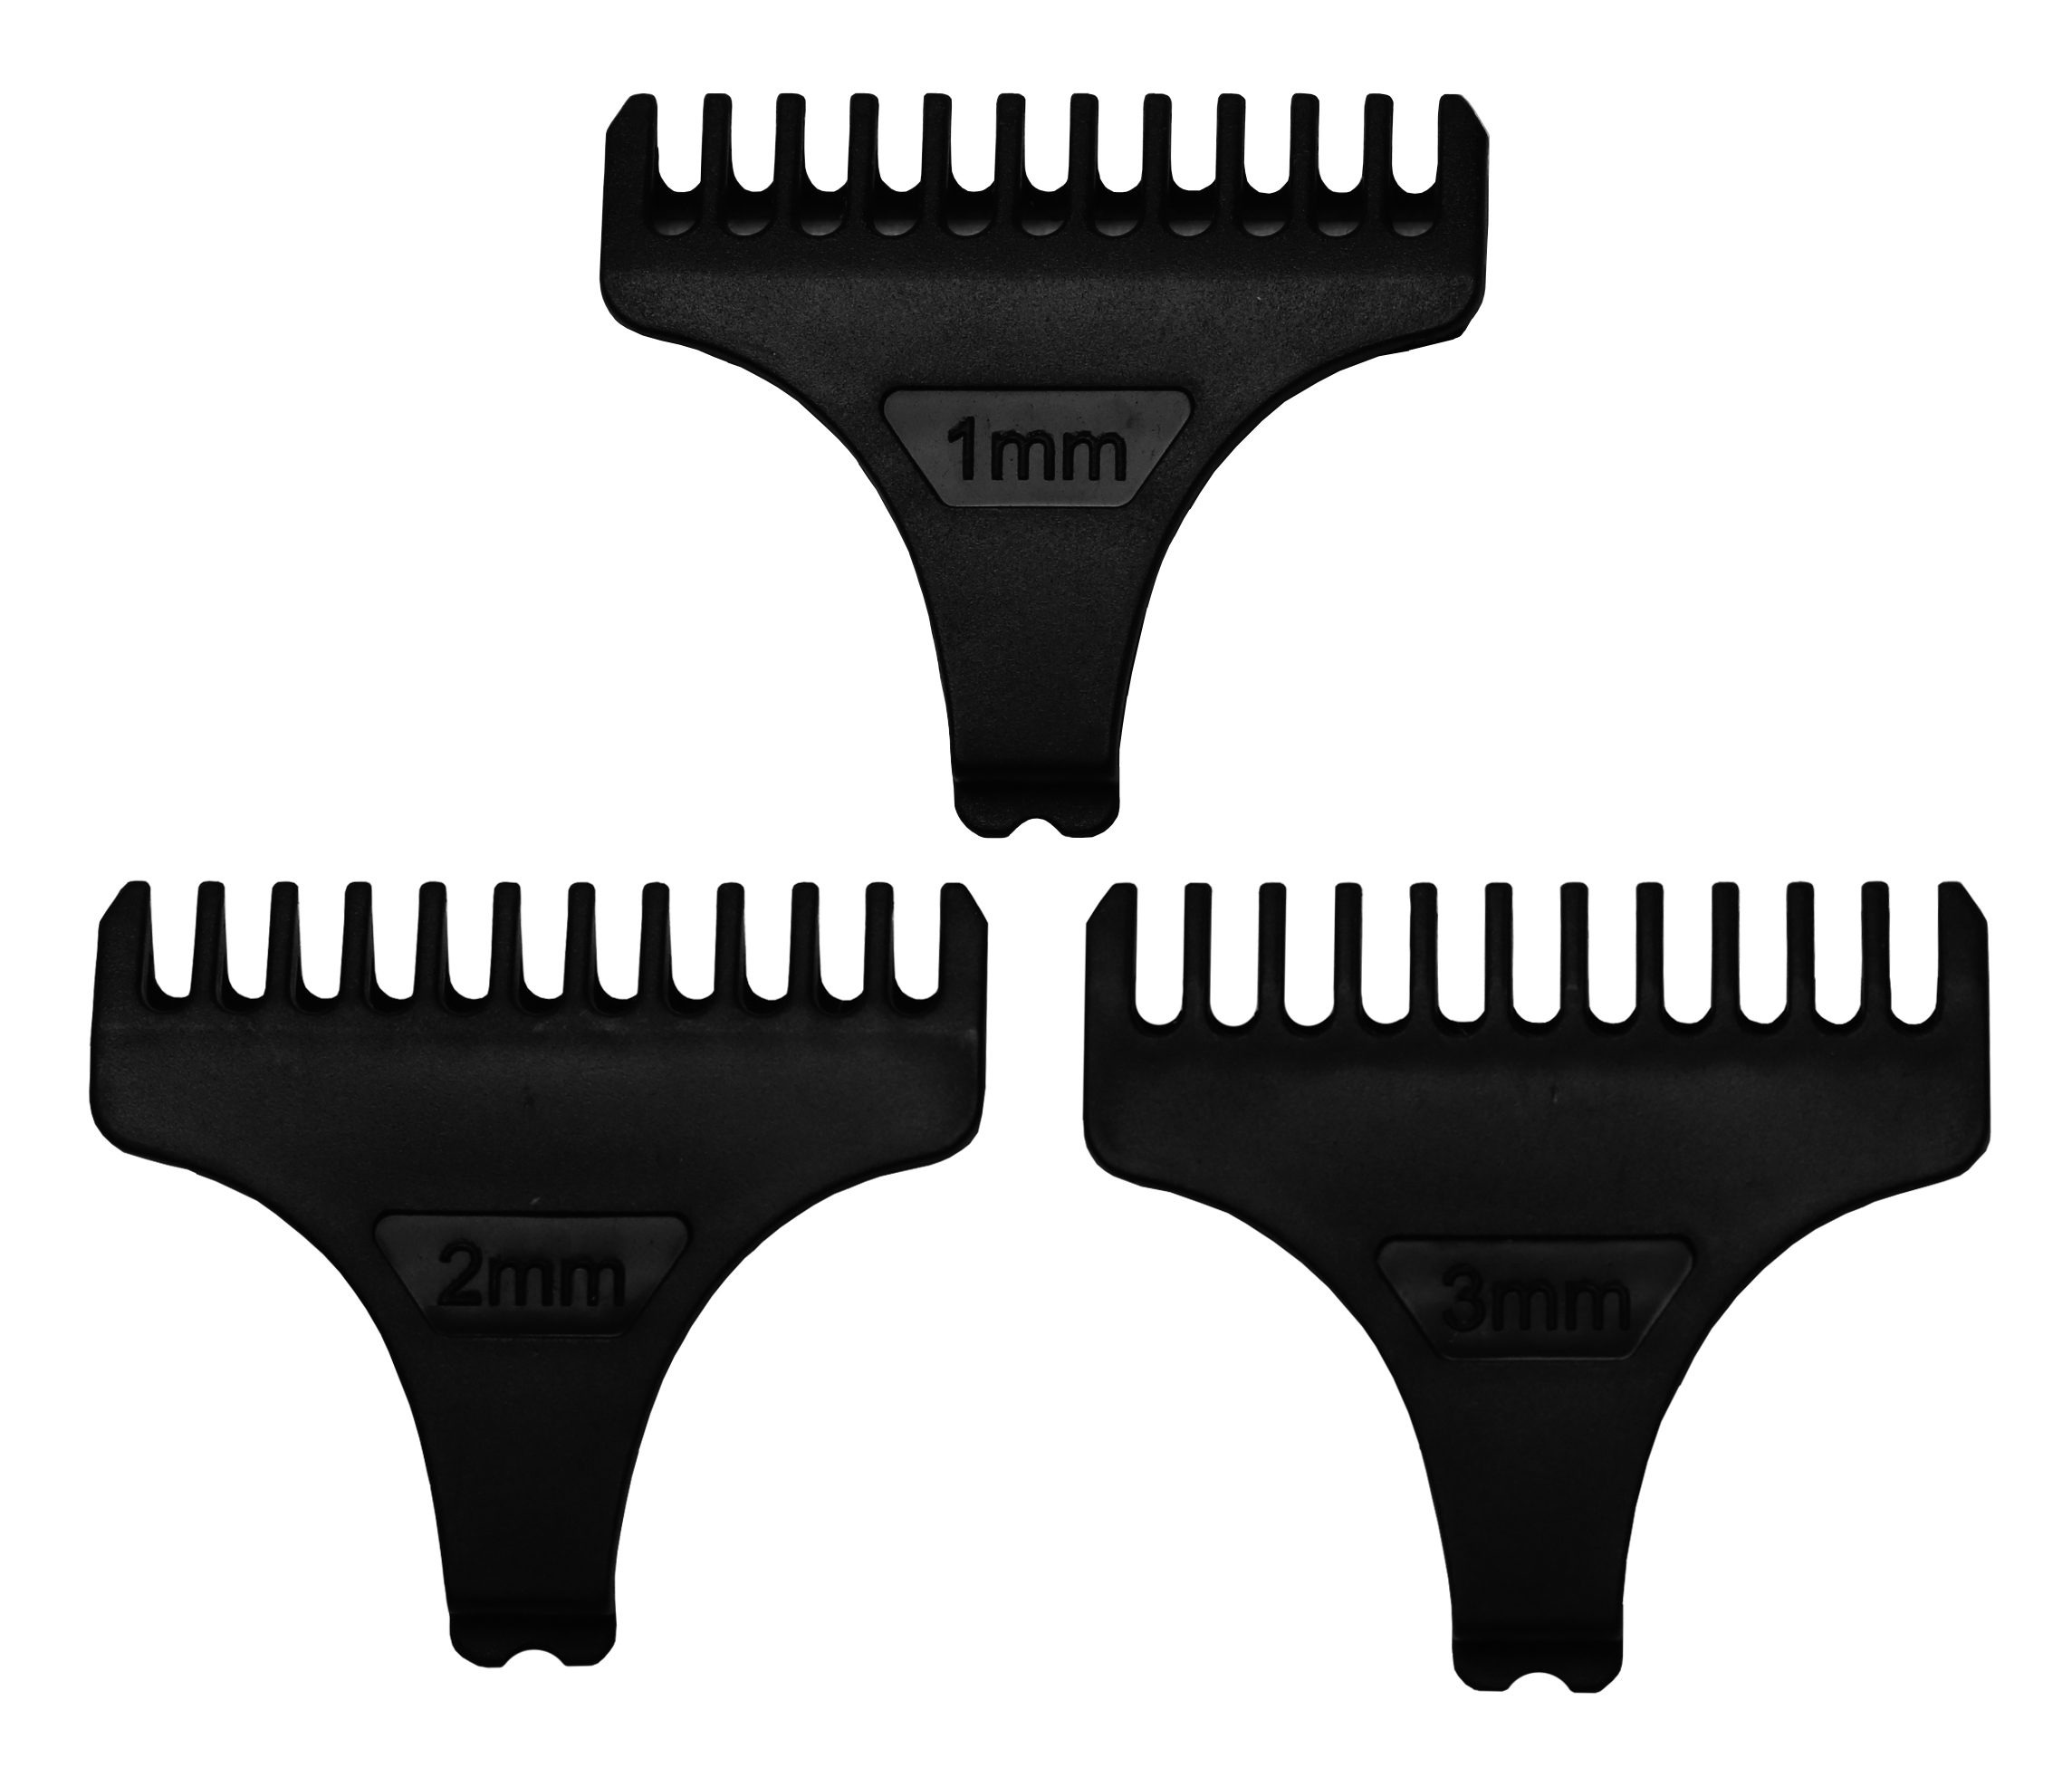 VINTAGE & CLASSIC STYLE Comb attachments for hair trimmer